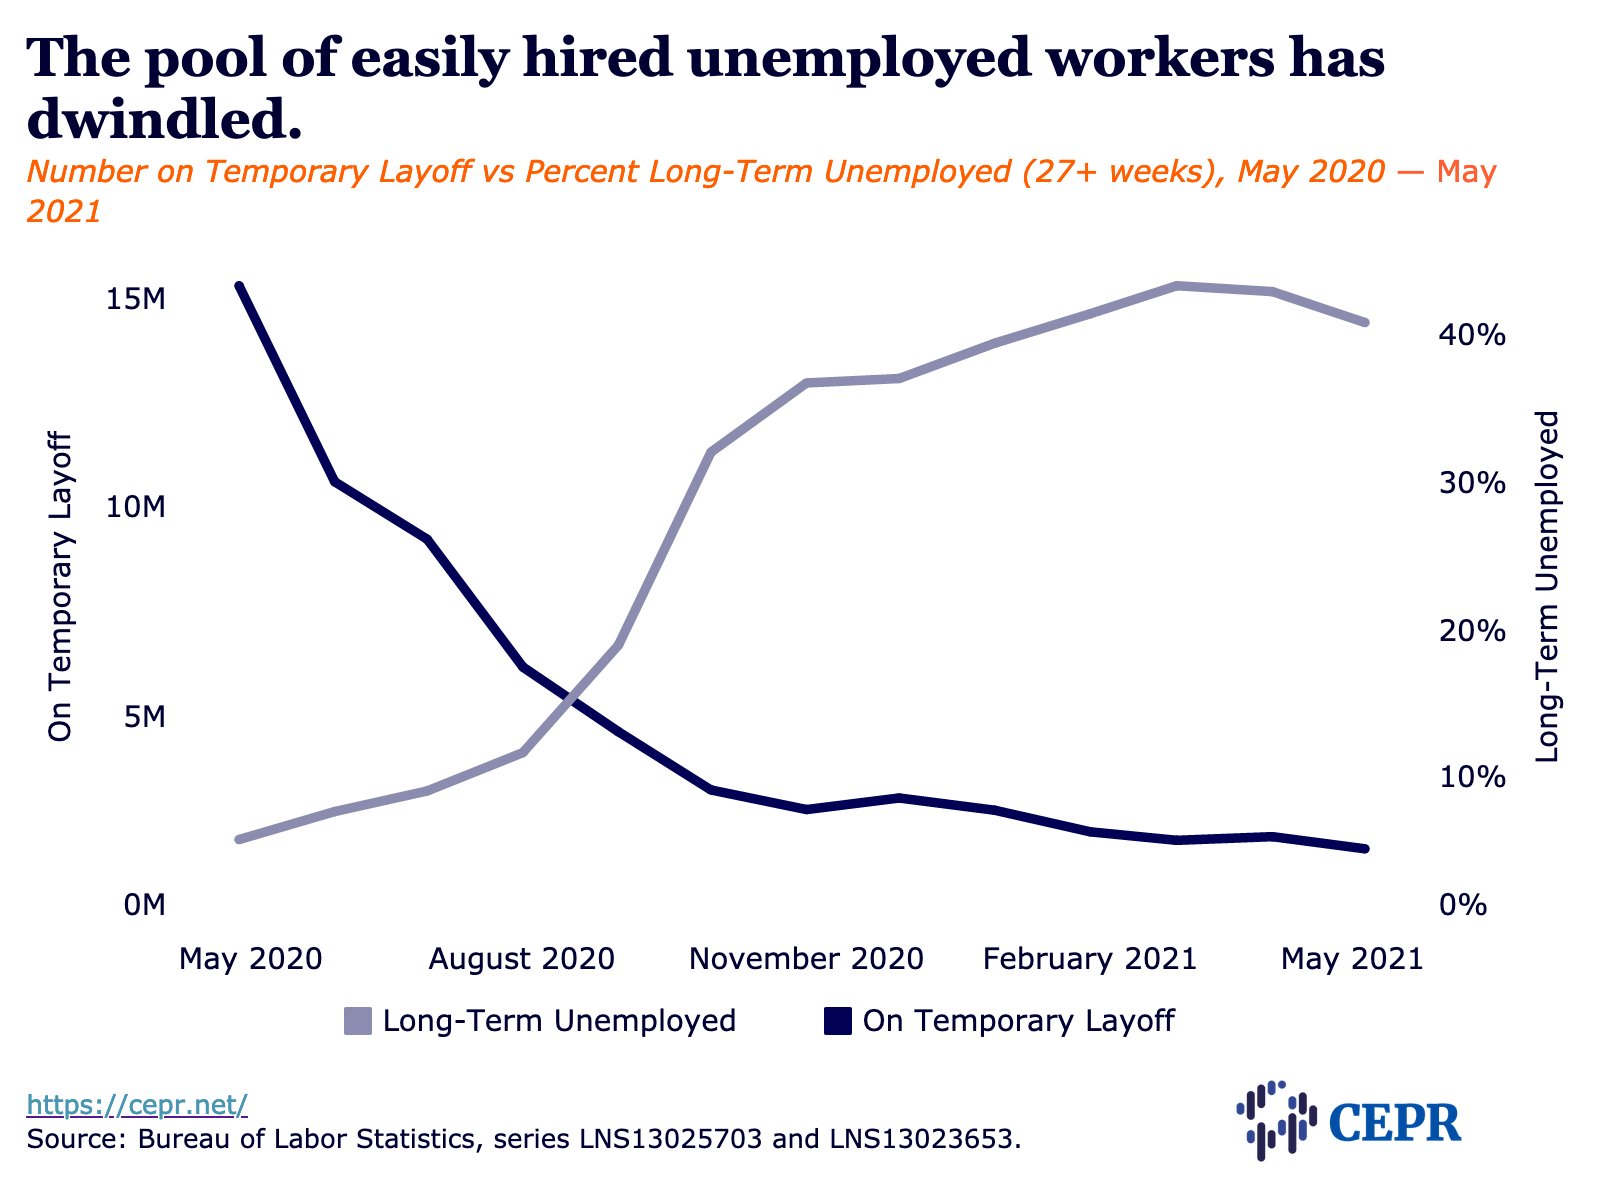 The pool of easily hired unemployed workers has dwindled